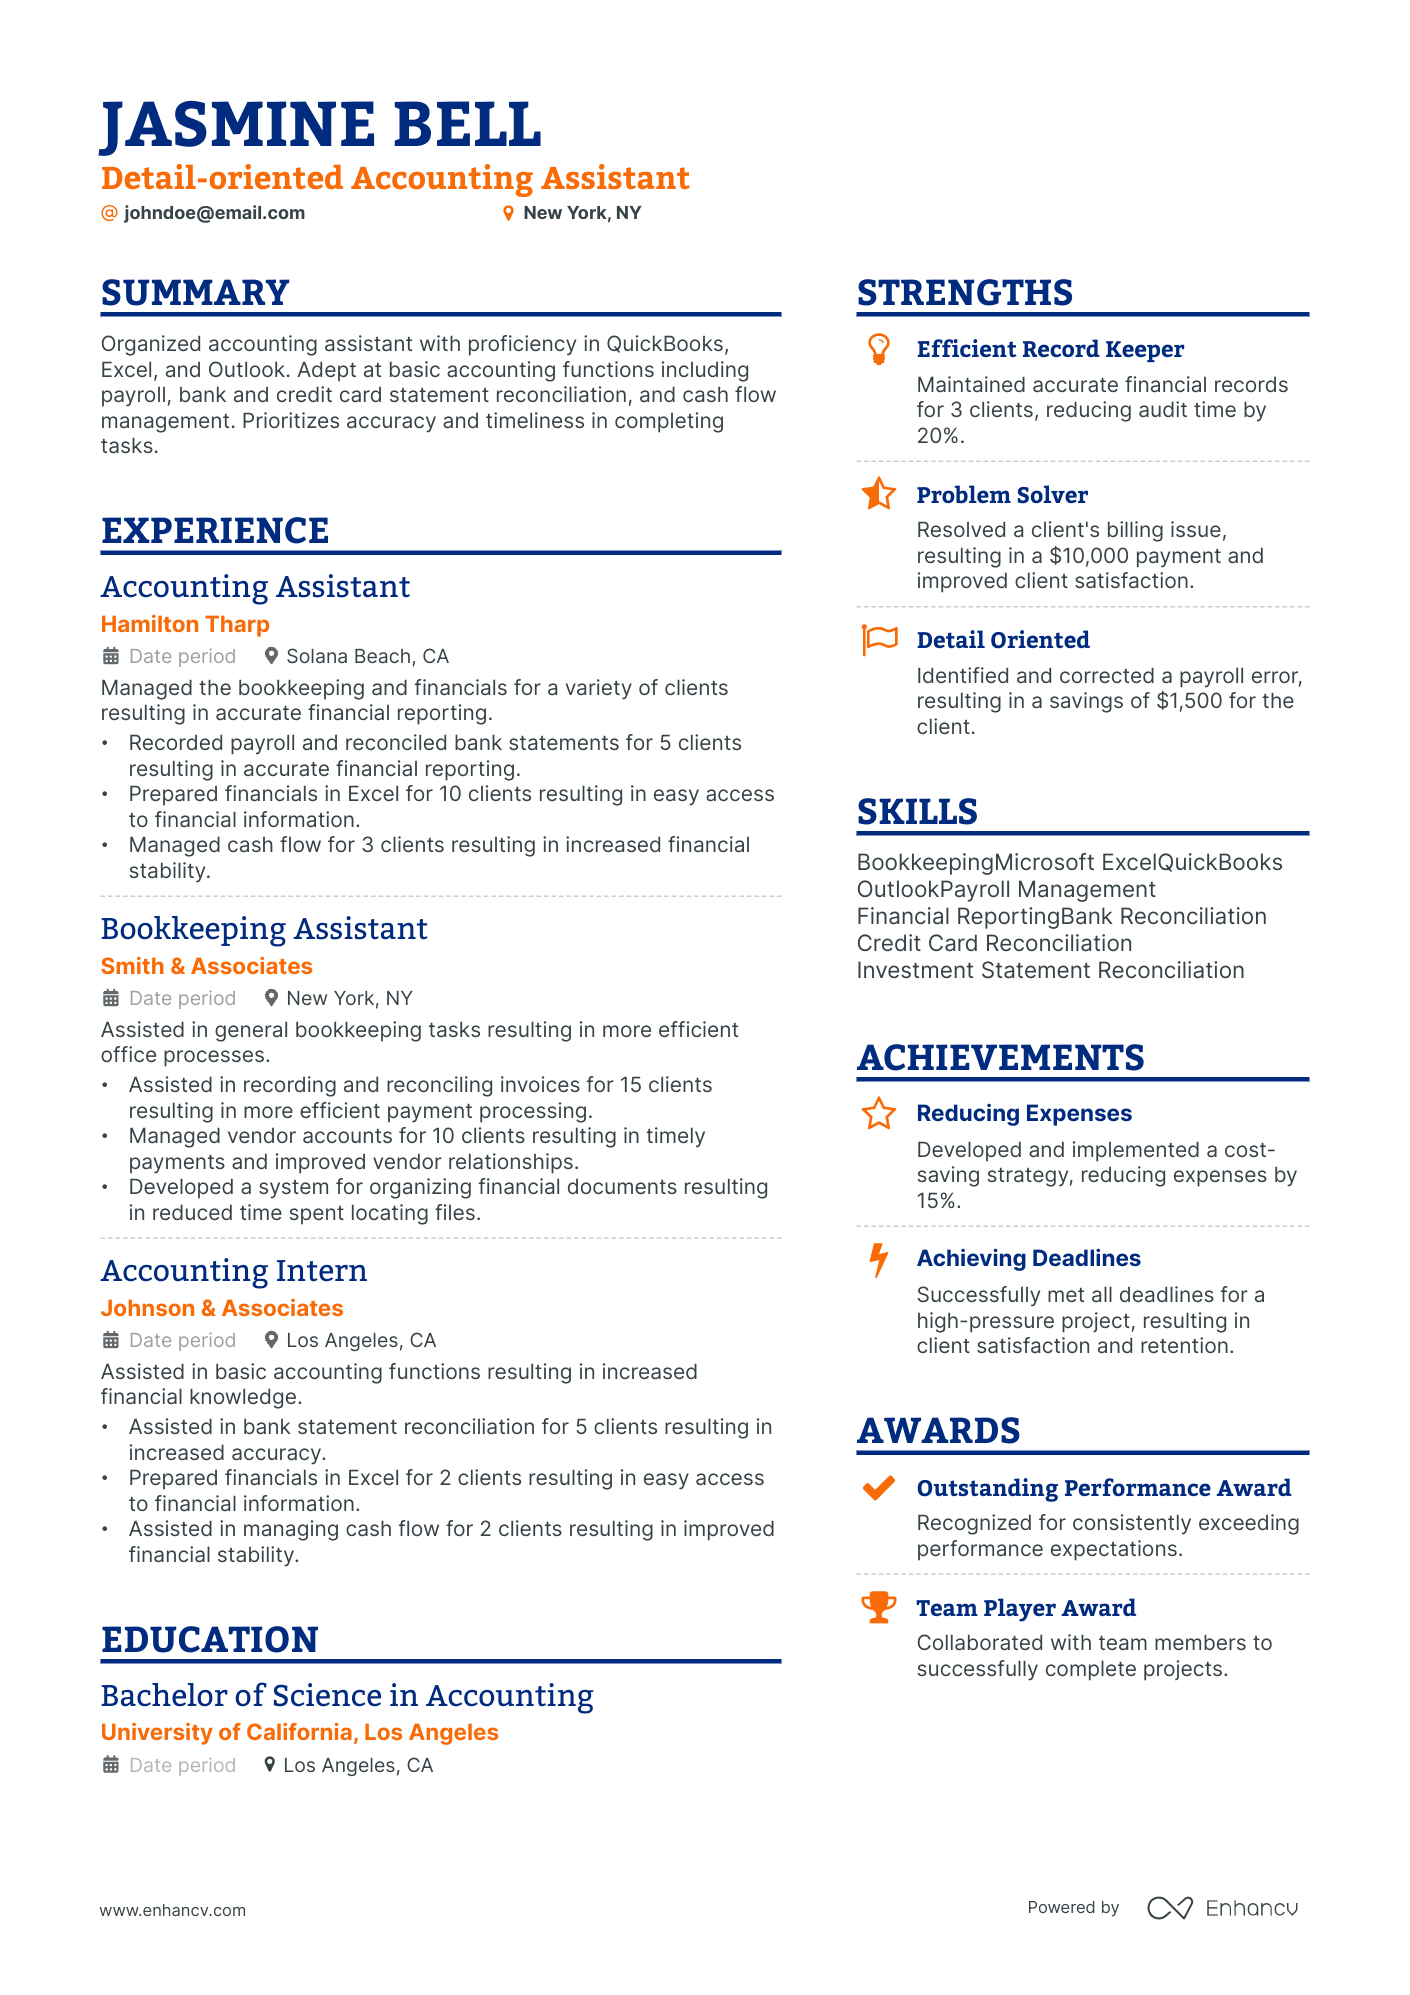 Accounting Assistant resume example